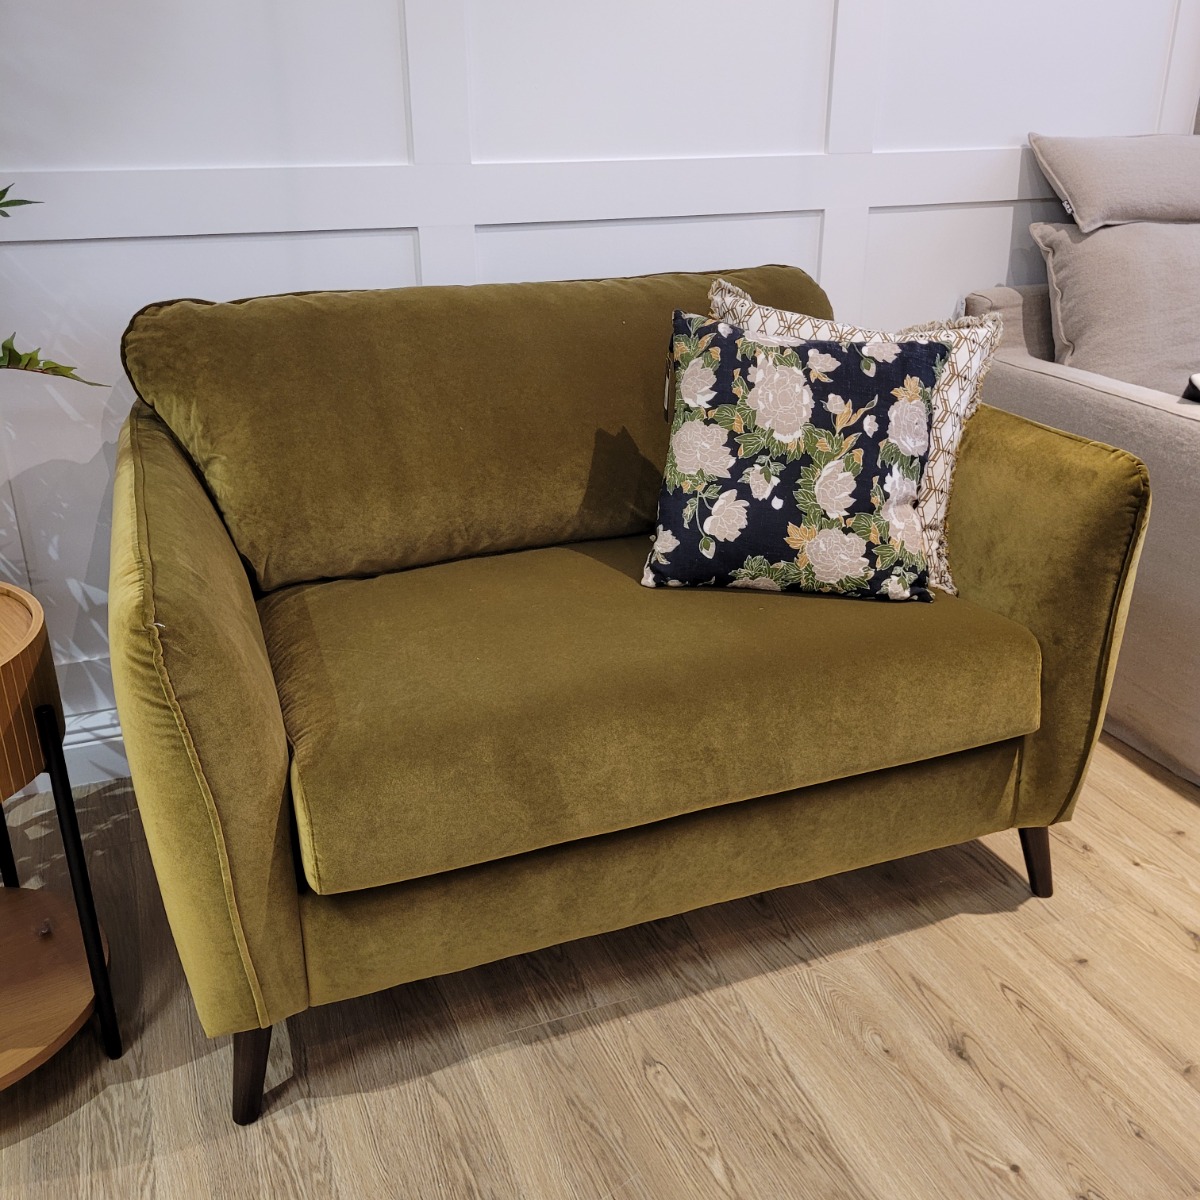 Lucy Armchair & Sofa Bed Grade 4 fabric